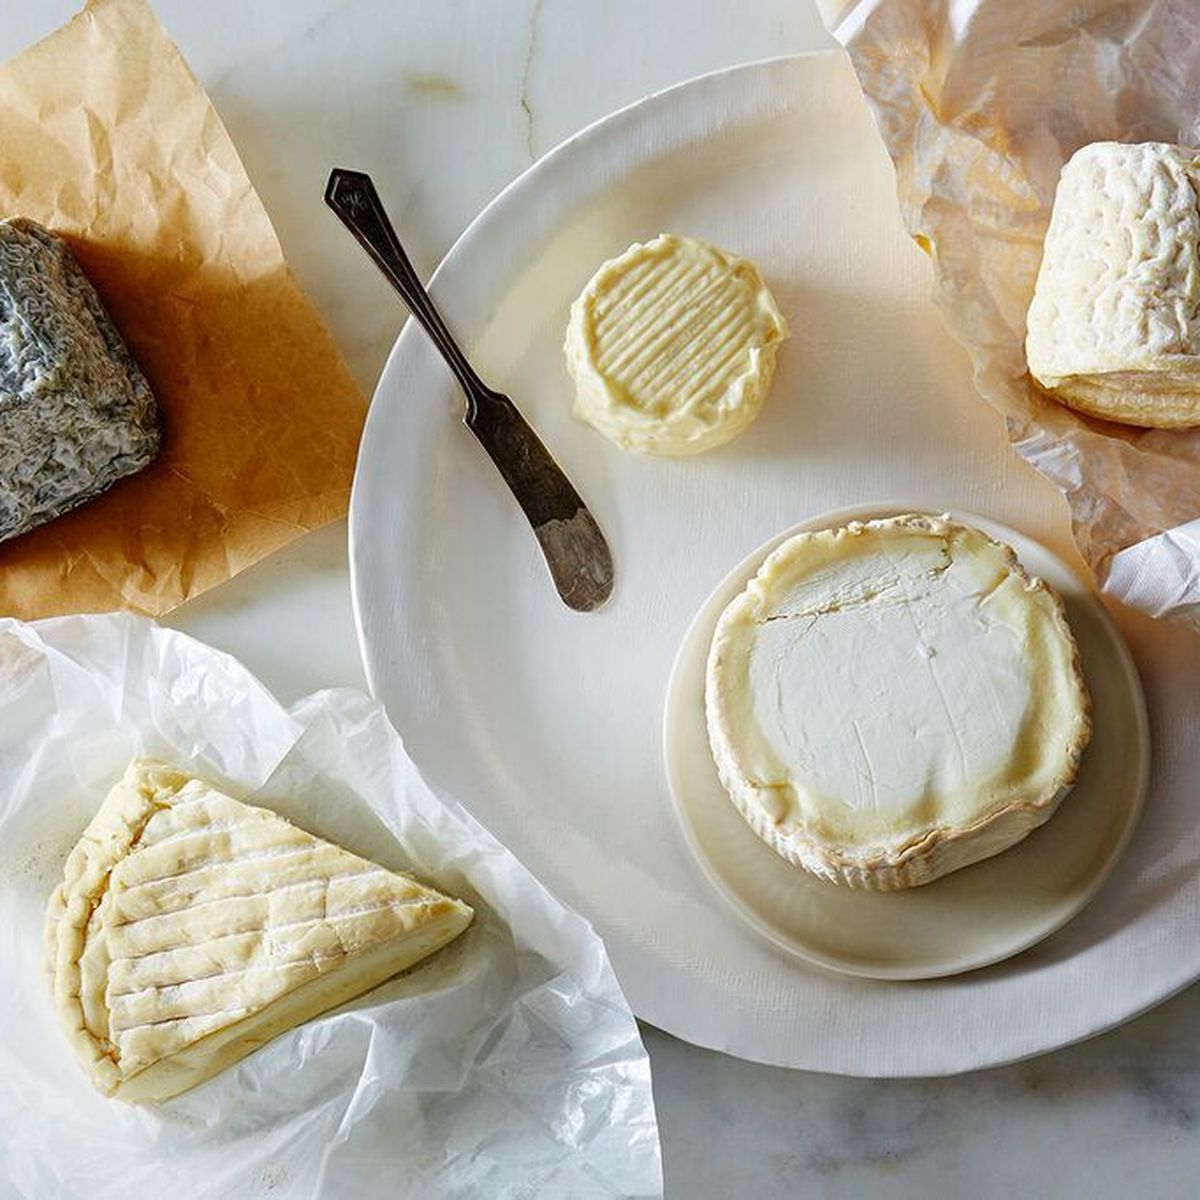 How To Store Goat Cheese